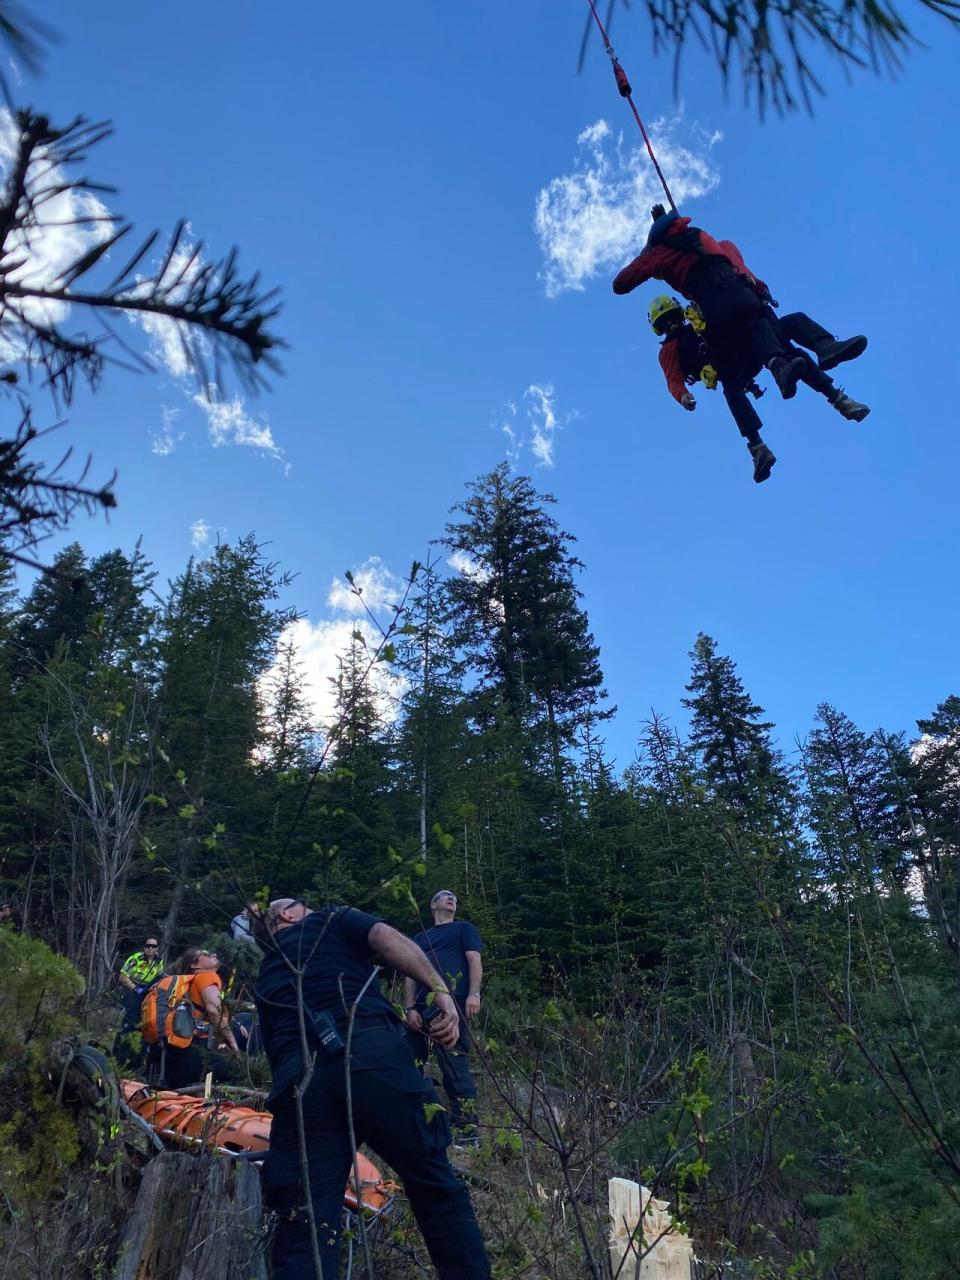 Search and rescue crew members look up as rescue personnel descend from a rescue helicopter Thursday during an operation to extract a man attacked by a grizzly bear from steep, complex terrain near the B.C.-Alberta border. (Submitted by Elkford Search and Rescue - image credit)